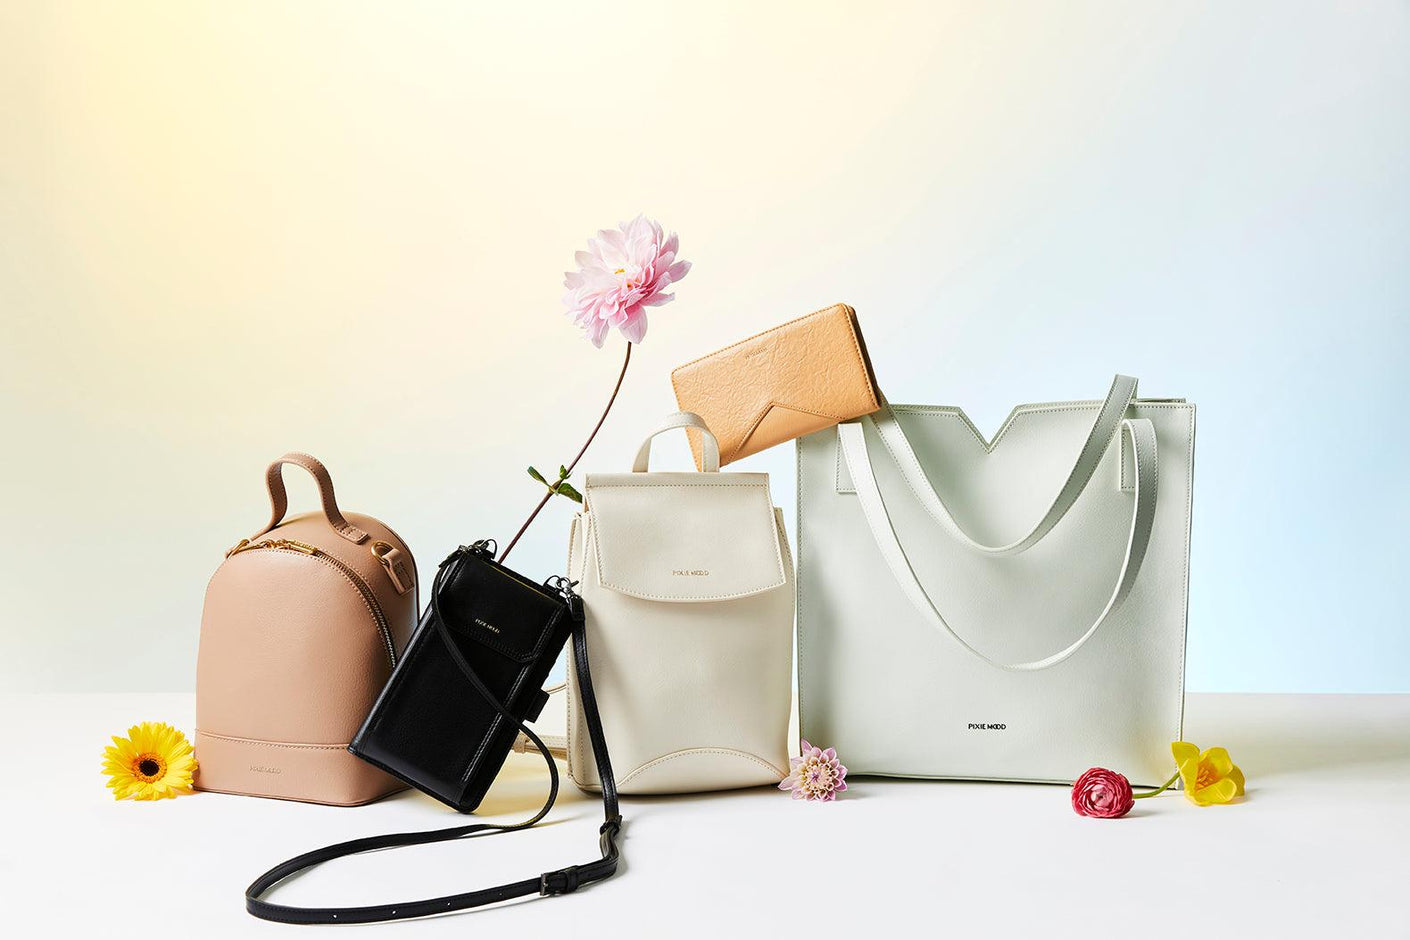 Sustainability at Pixie Mood: Packaging, Partnerships & More - Pixie Mood Vegan Leather Bags